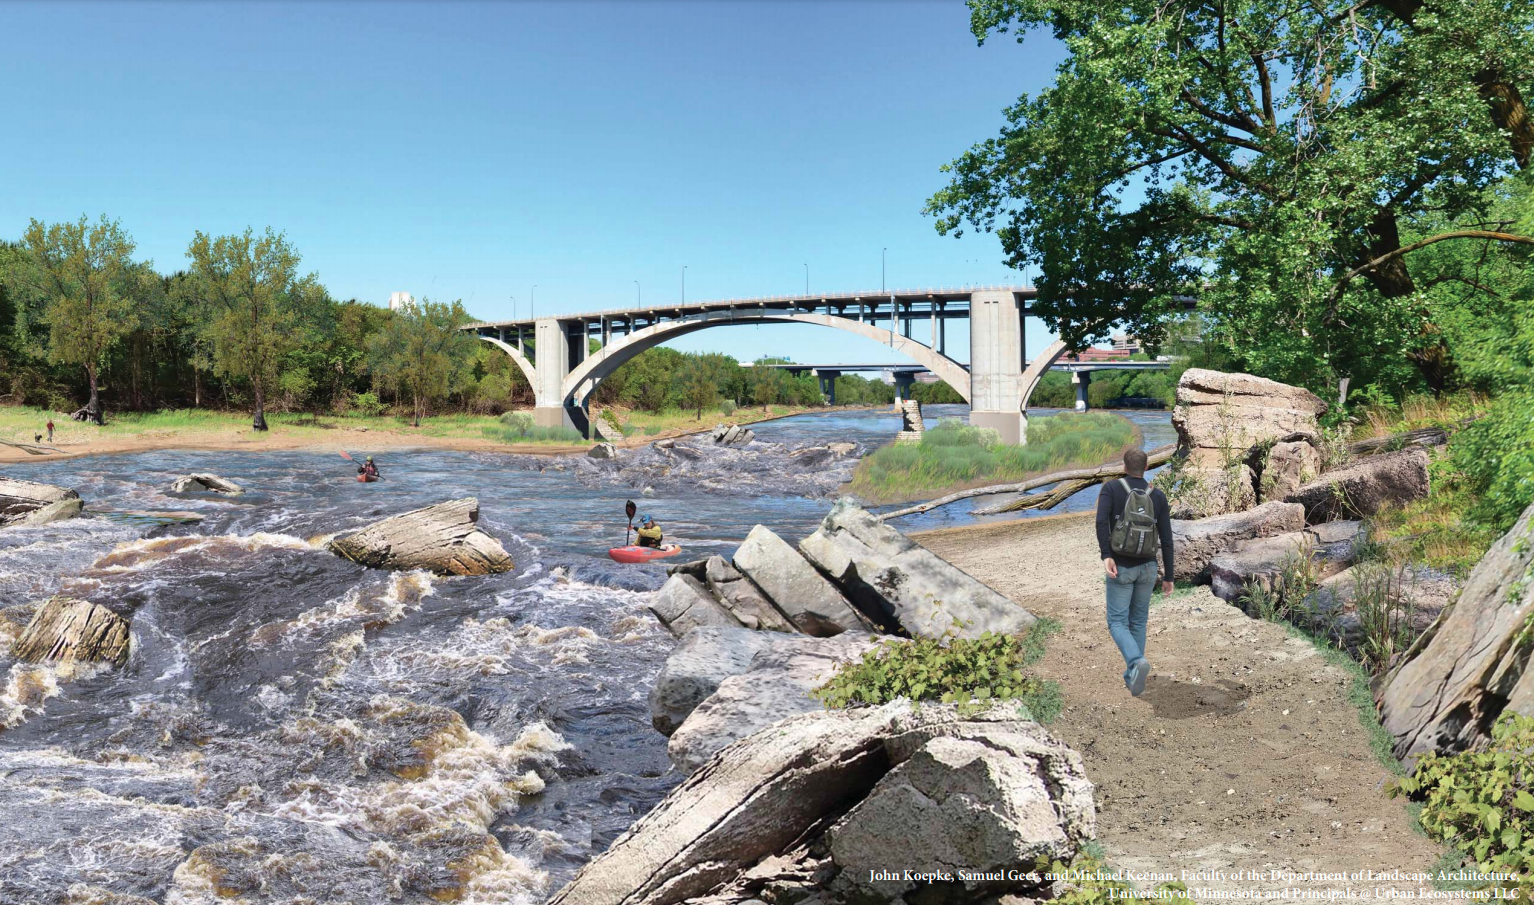 Rendering of whitewater